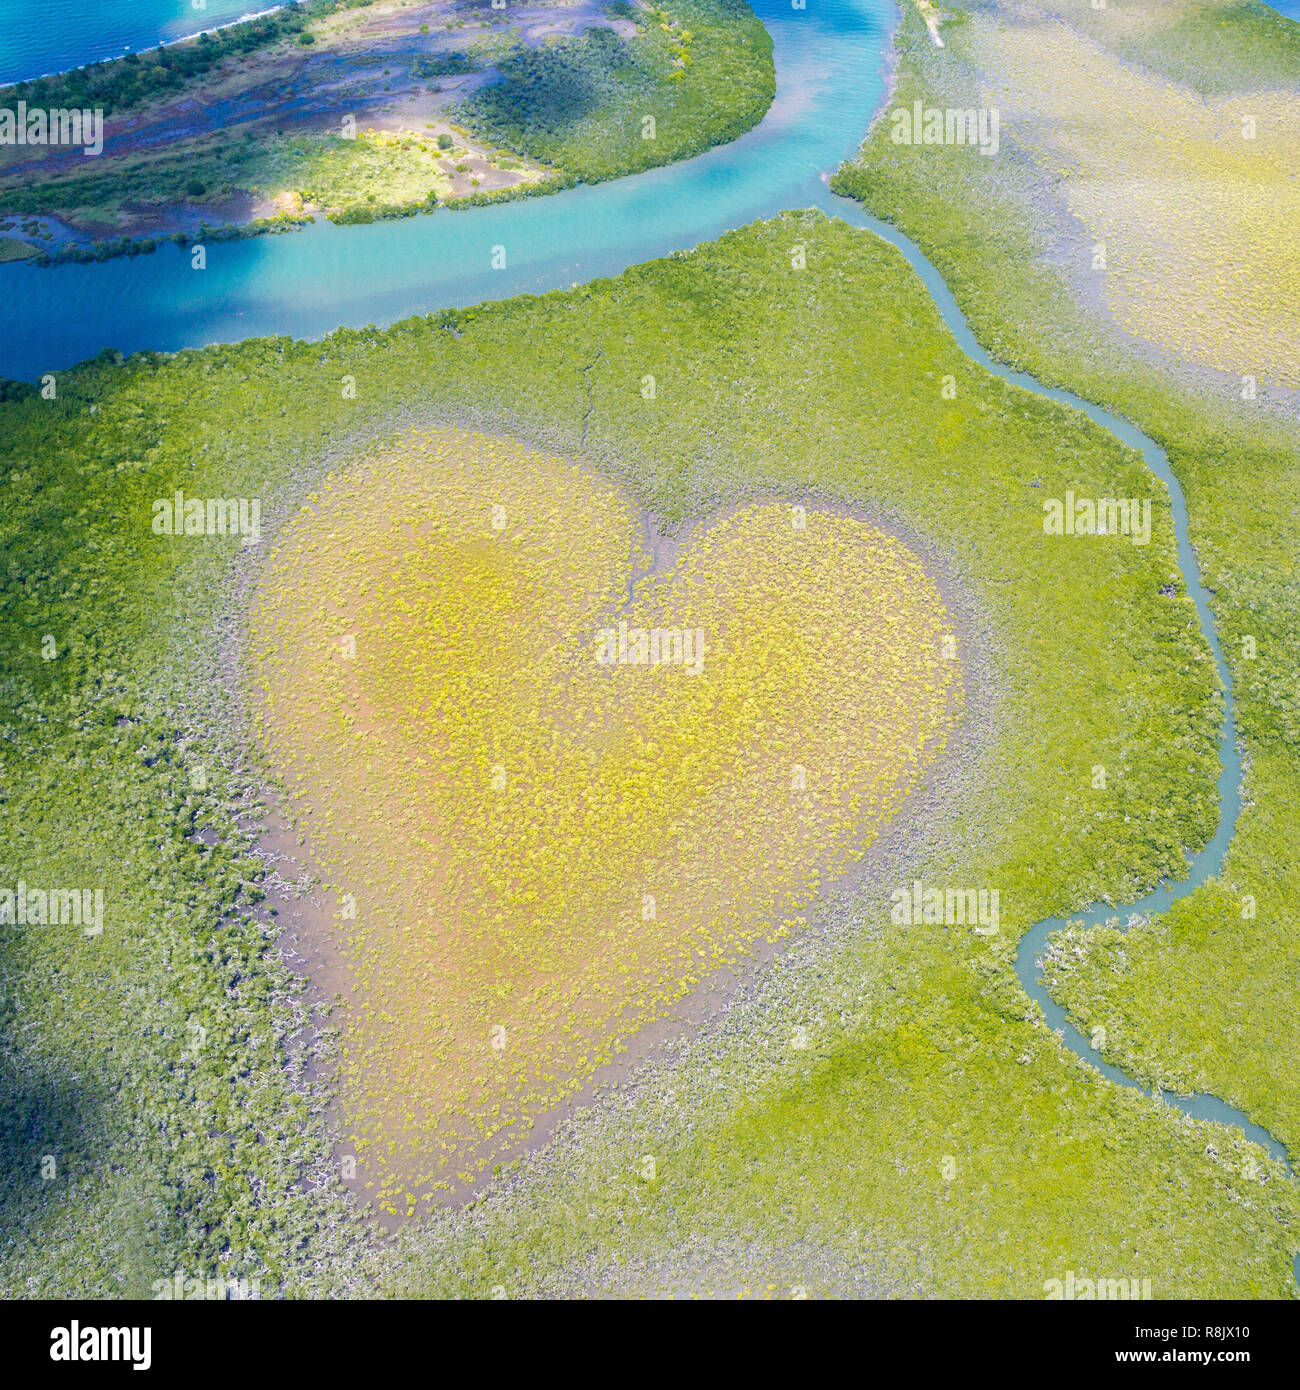 Heart of Voh, aerial view, formation of mangroves vegetation resembles a heart seen from above, New Caledonia, Micronesia, South Pacific Ocean. Heart of Earth. Earth day. Love life, save environment. Stock Photo